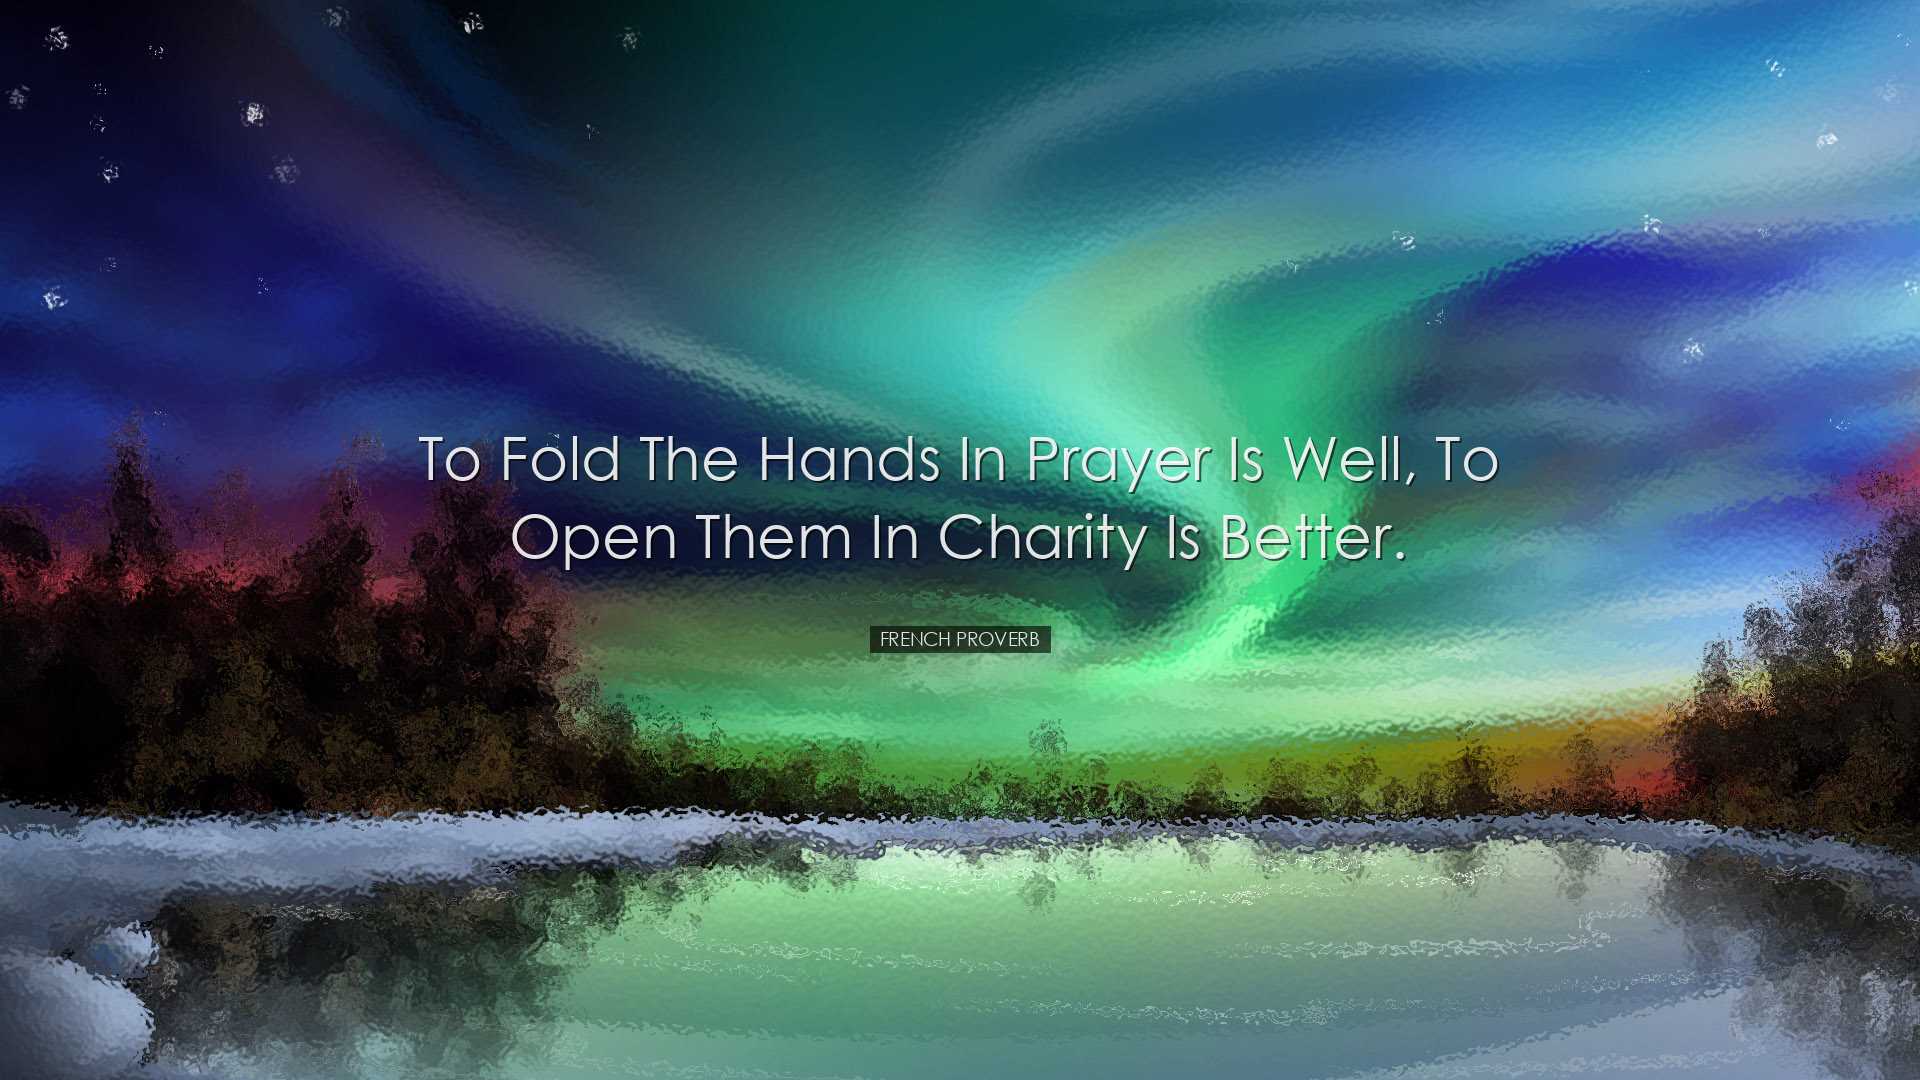 To fold the hands in prayer is well, to open them in charity is be